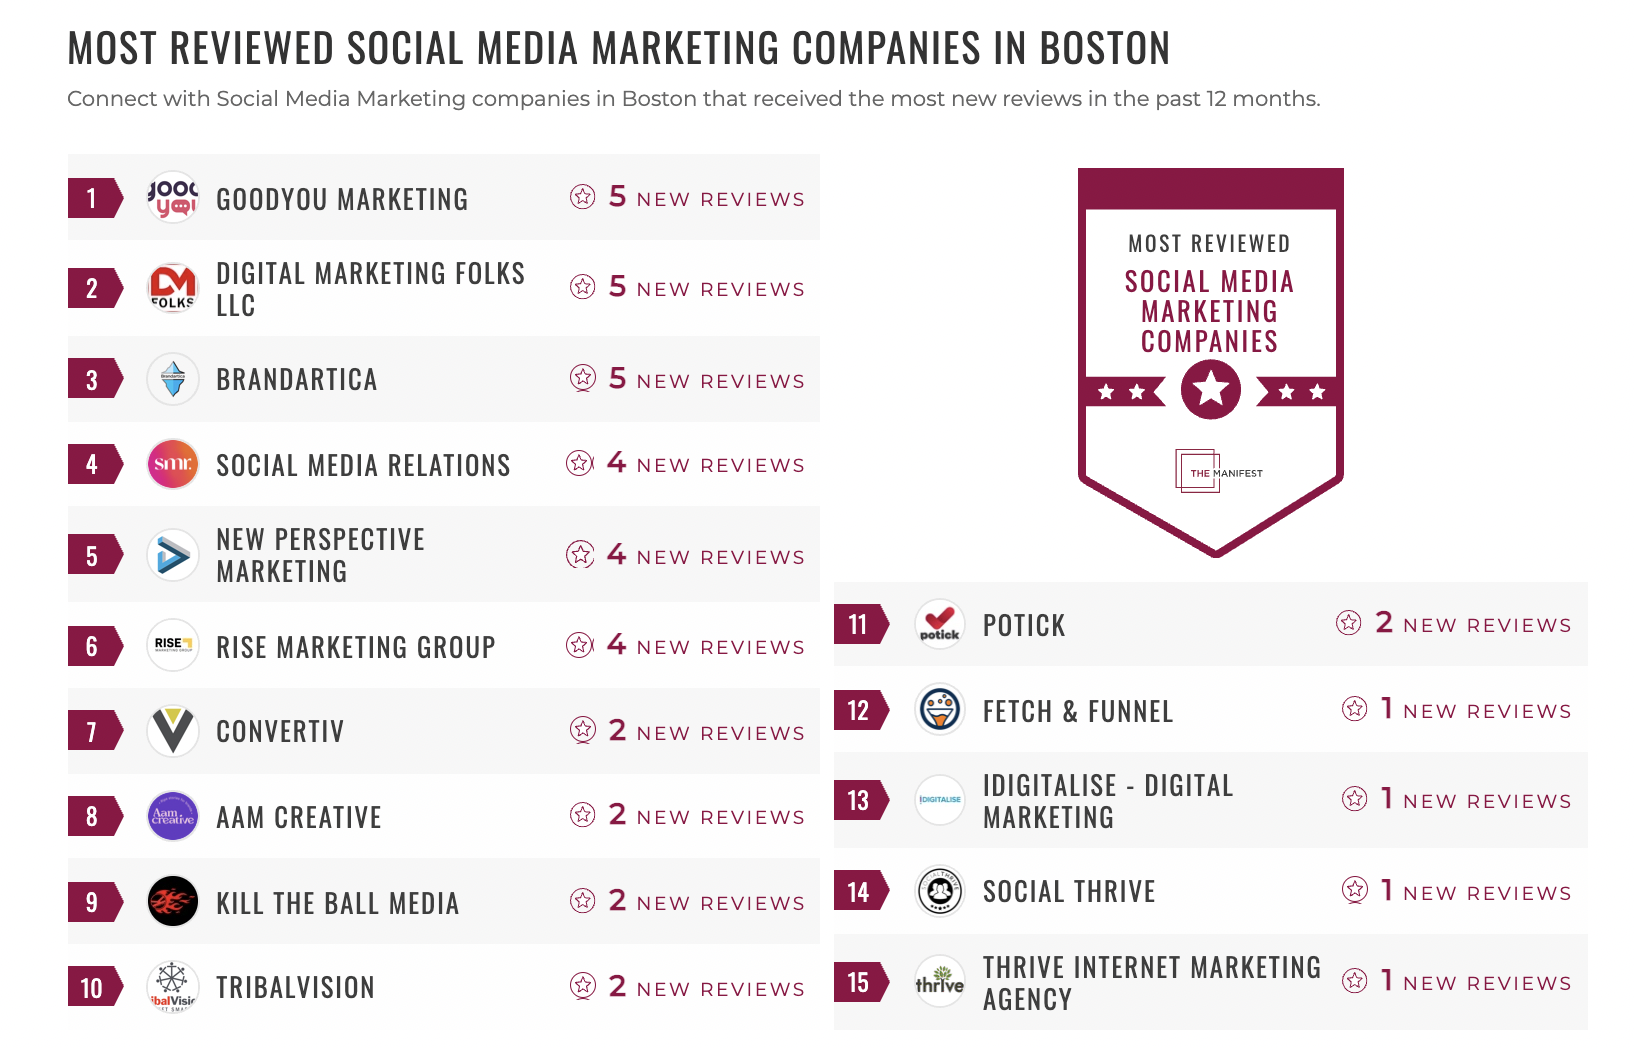 Most Reviewed Social Media Marketing Companies in Boston